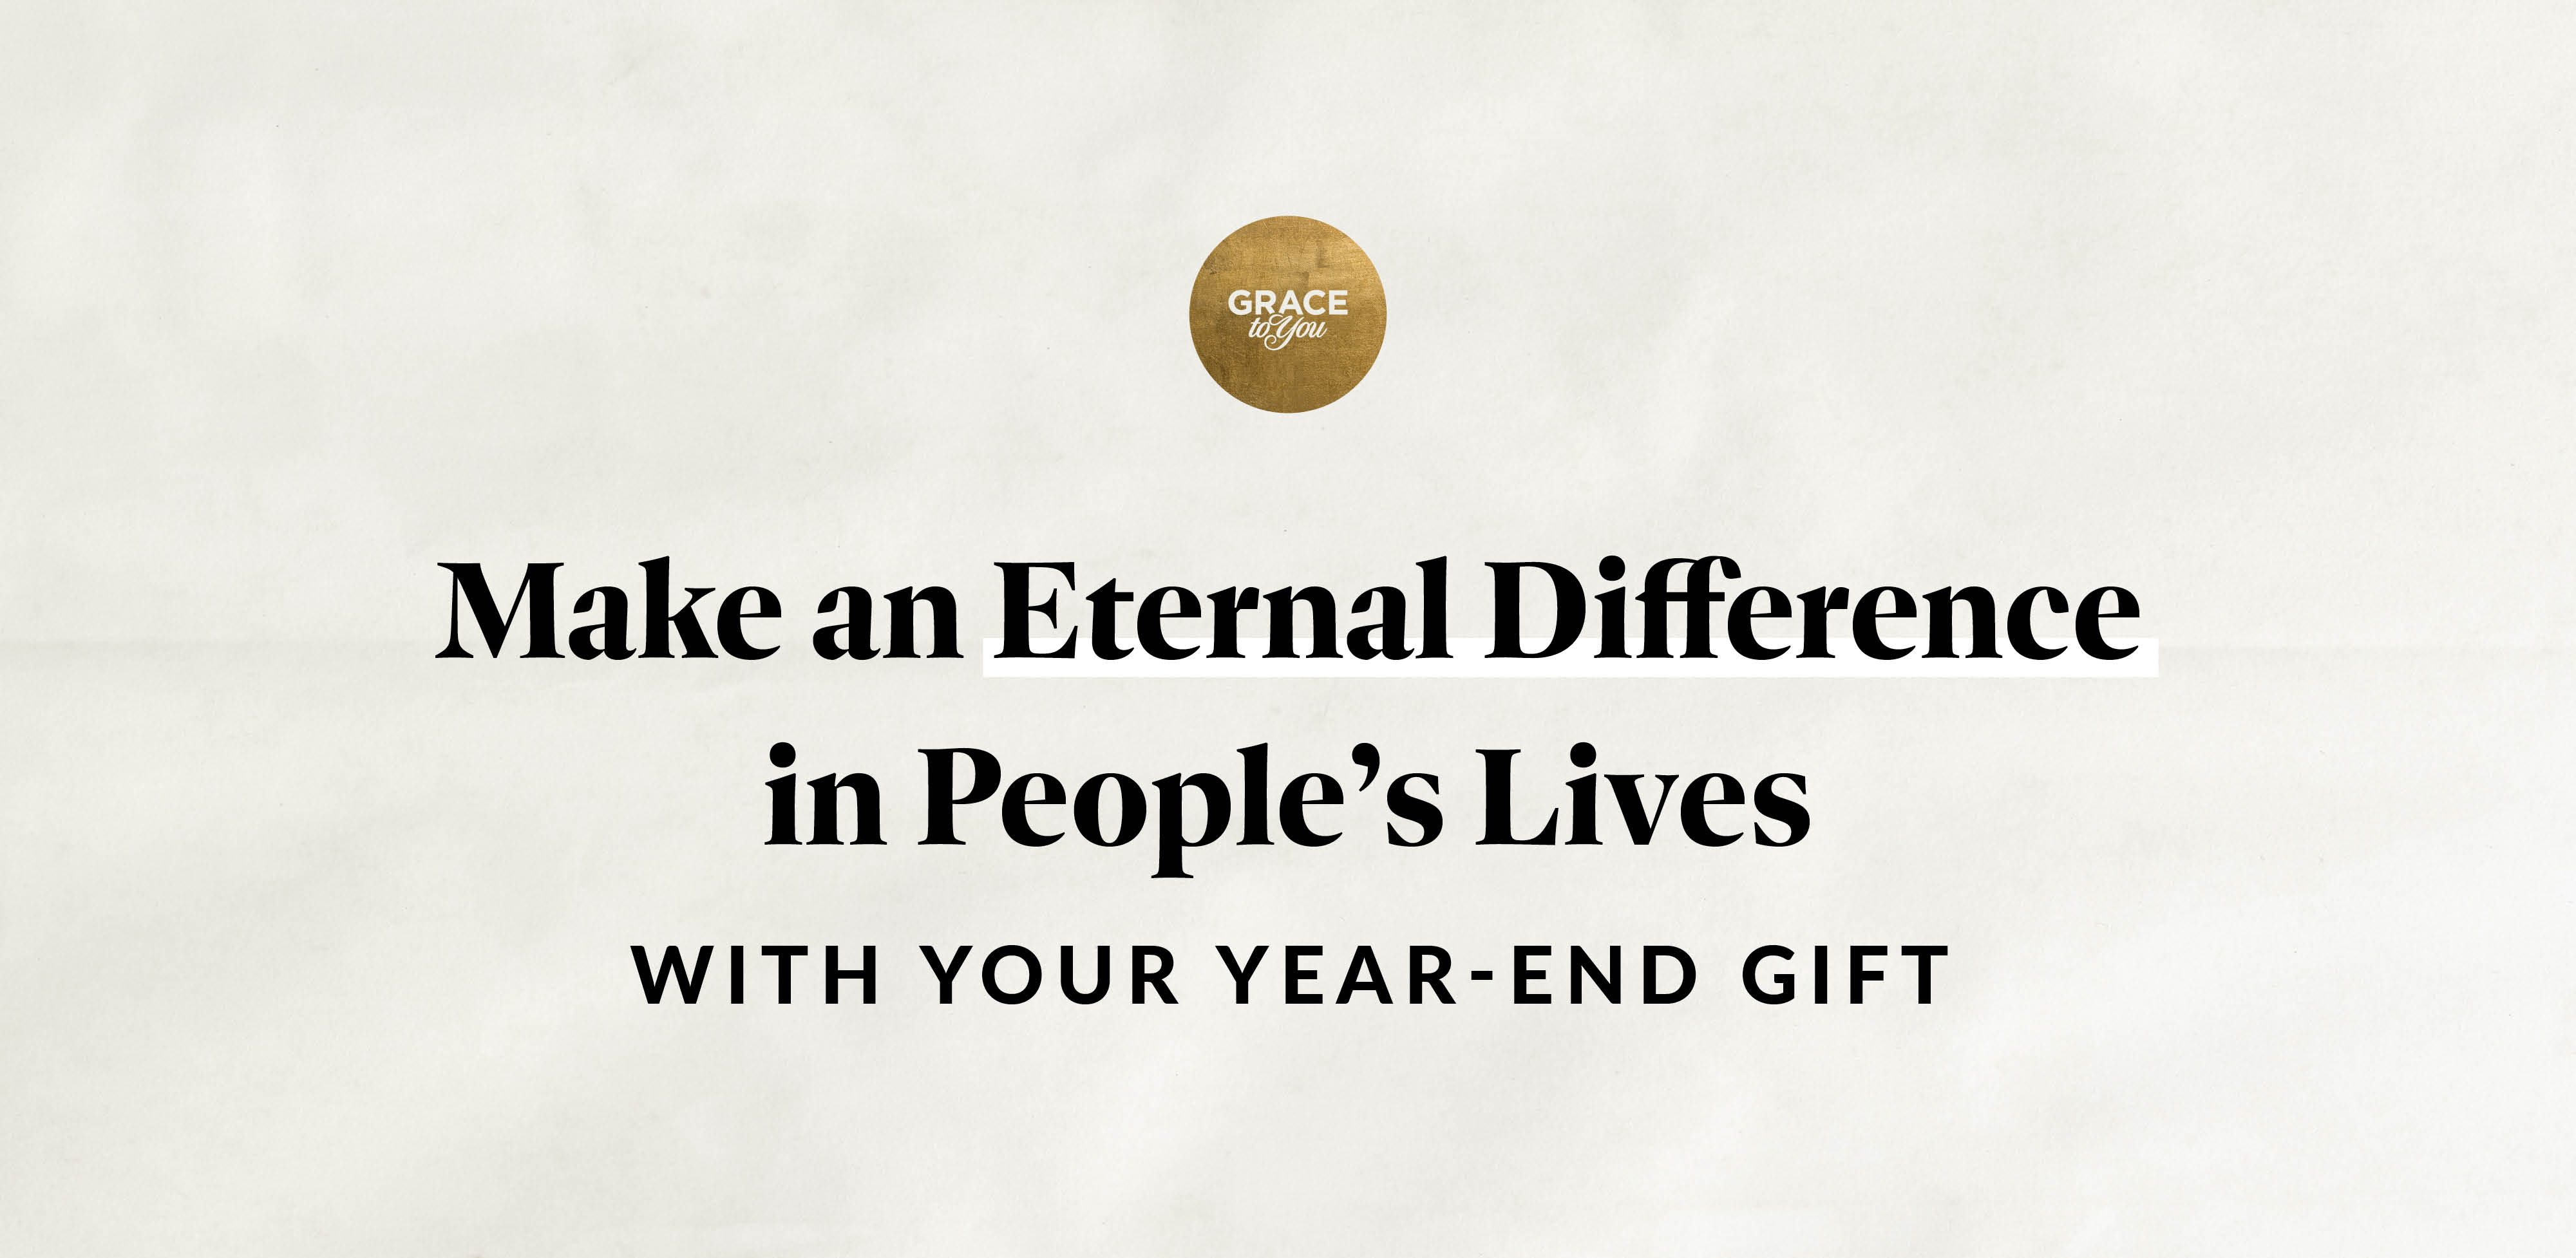 Your Year-End Gift Makes a Difference